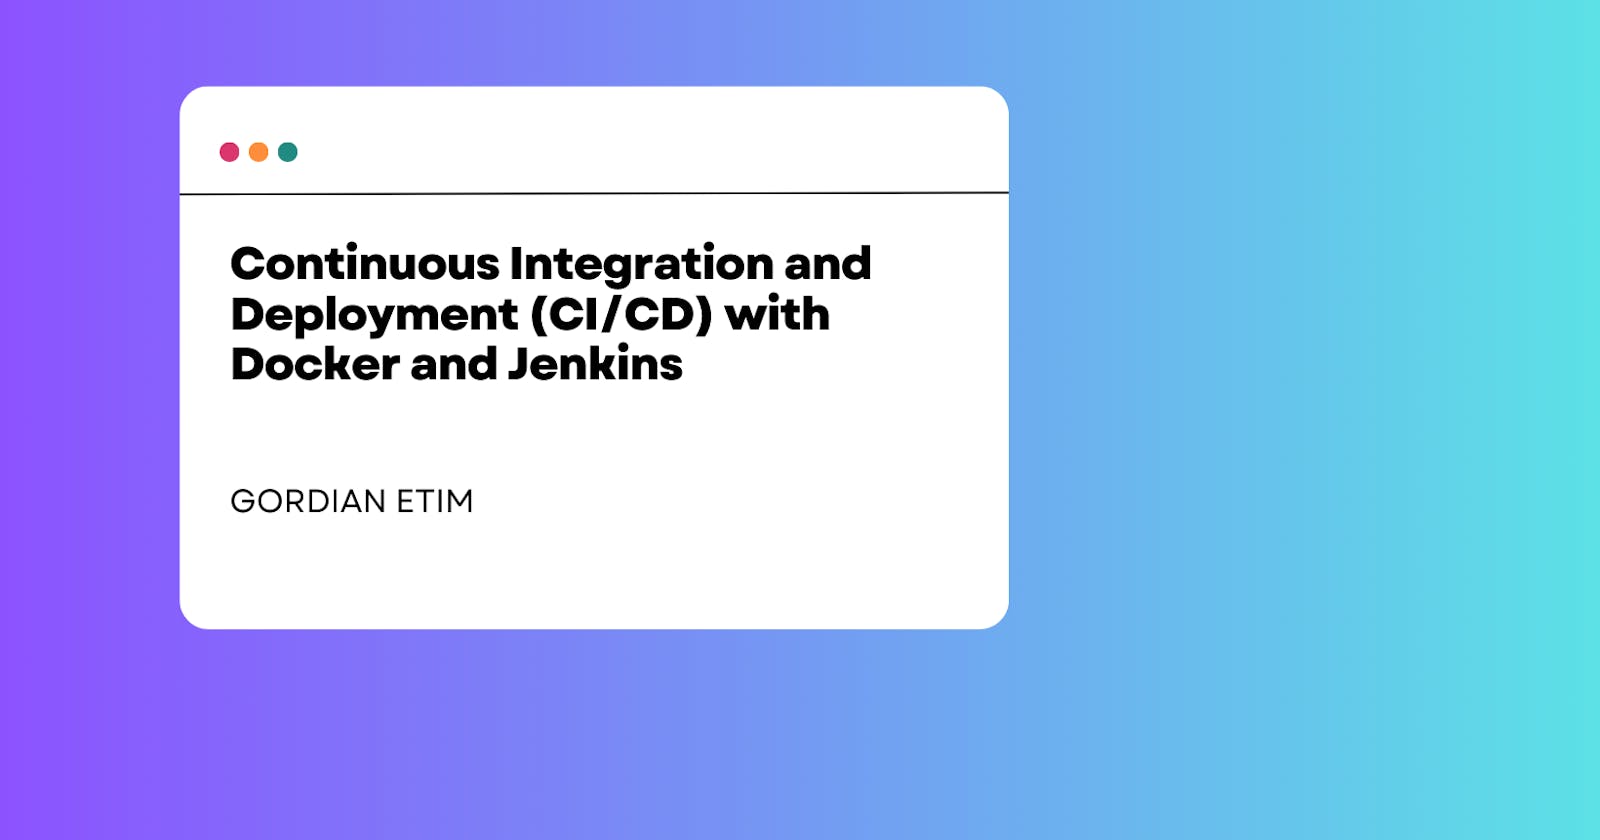 Continuous Integration and Deployment (CI/CD) with Docker and Jenkins